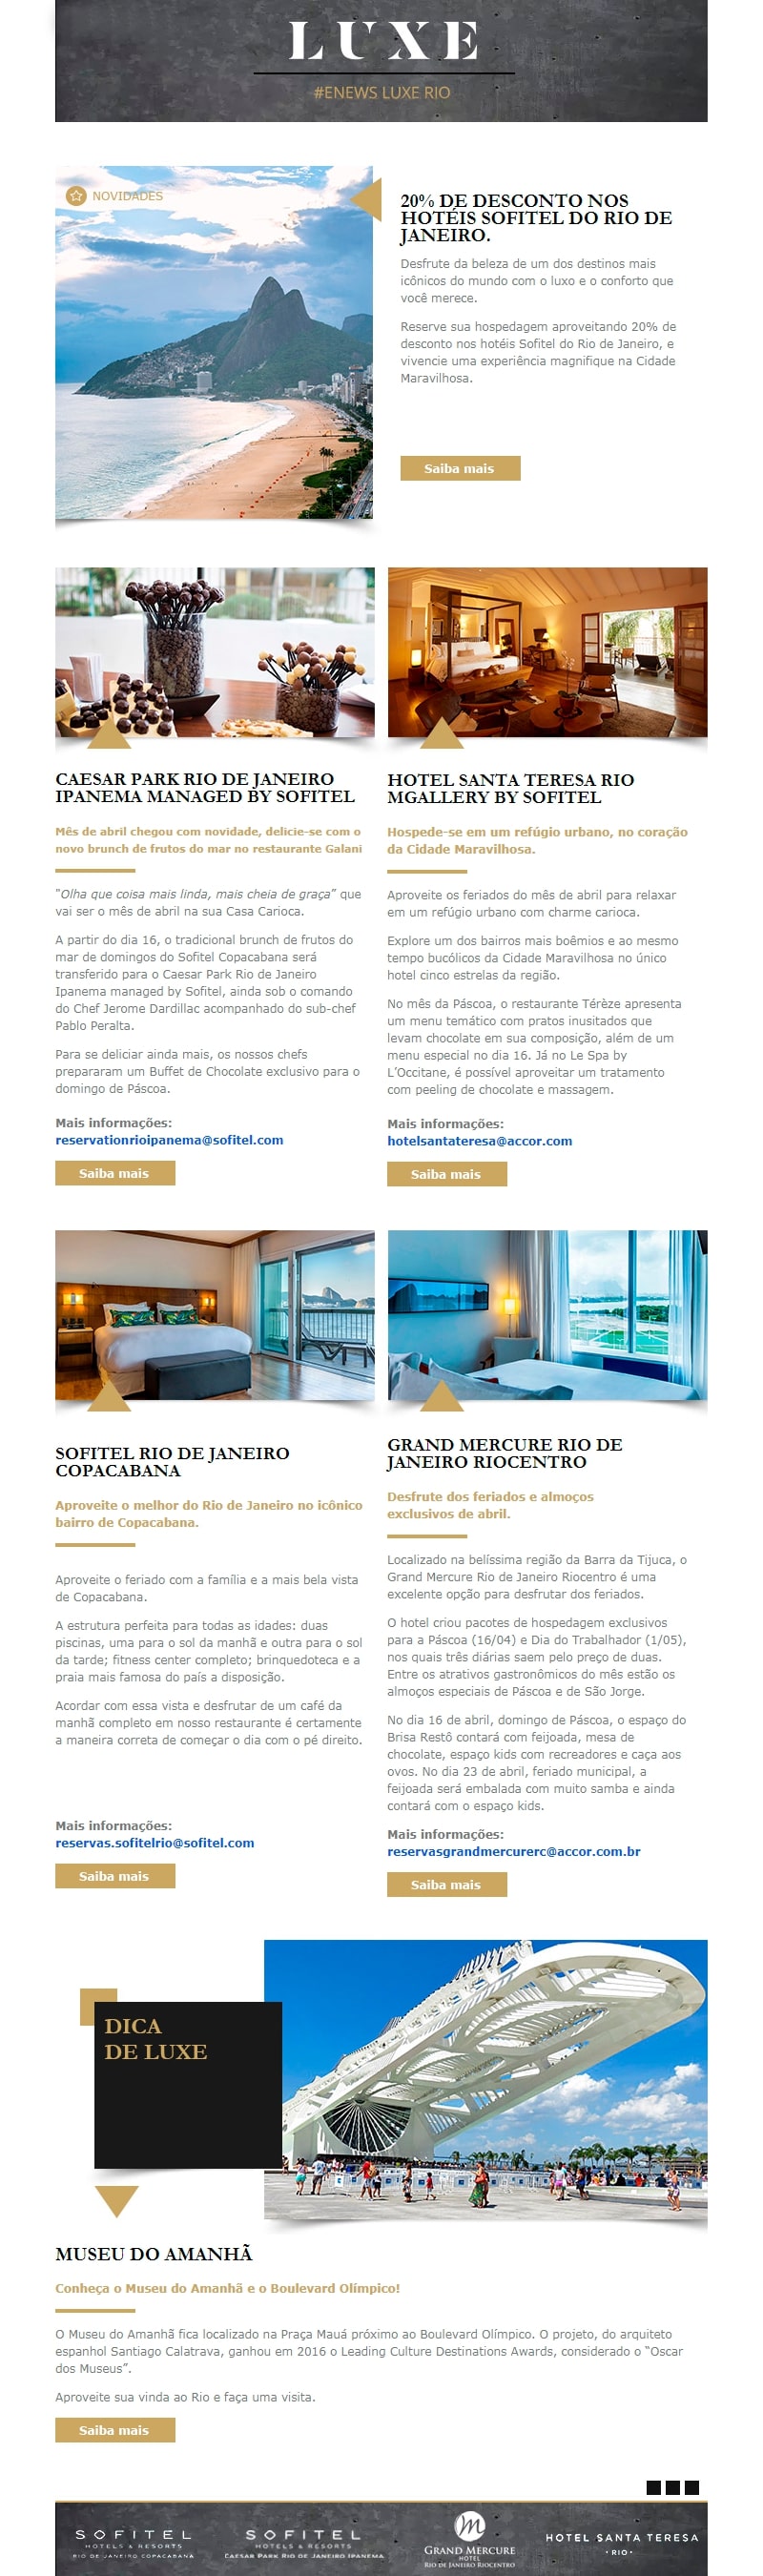 Newsletter Accor Luxe